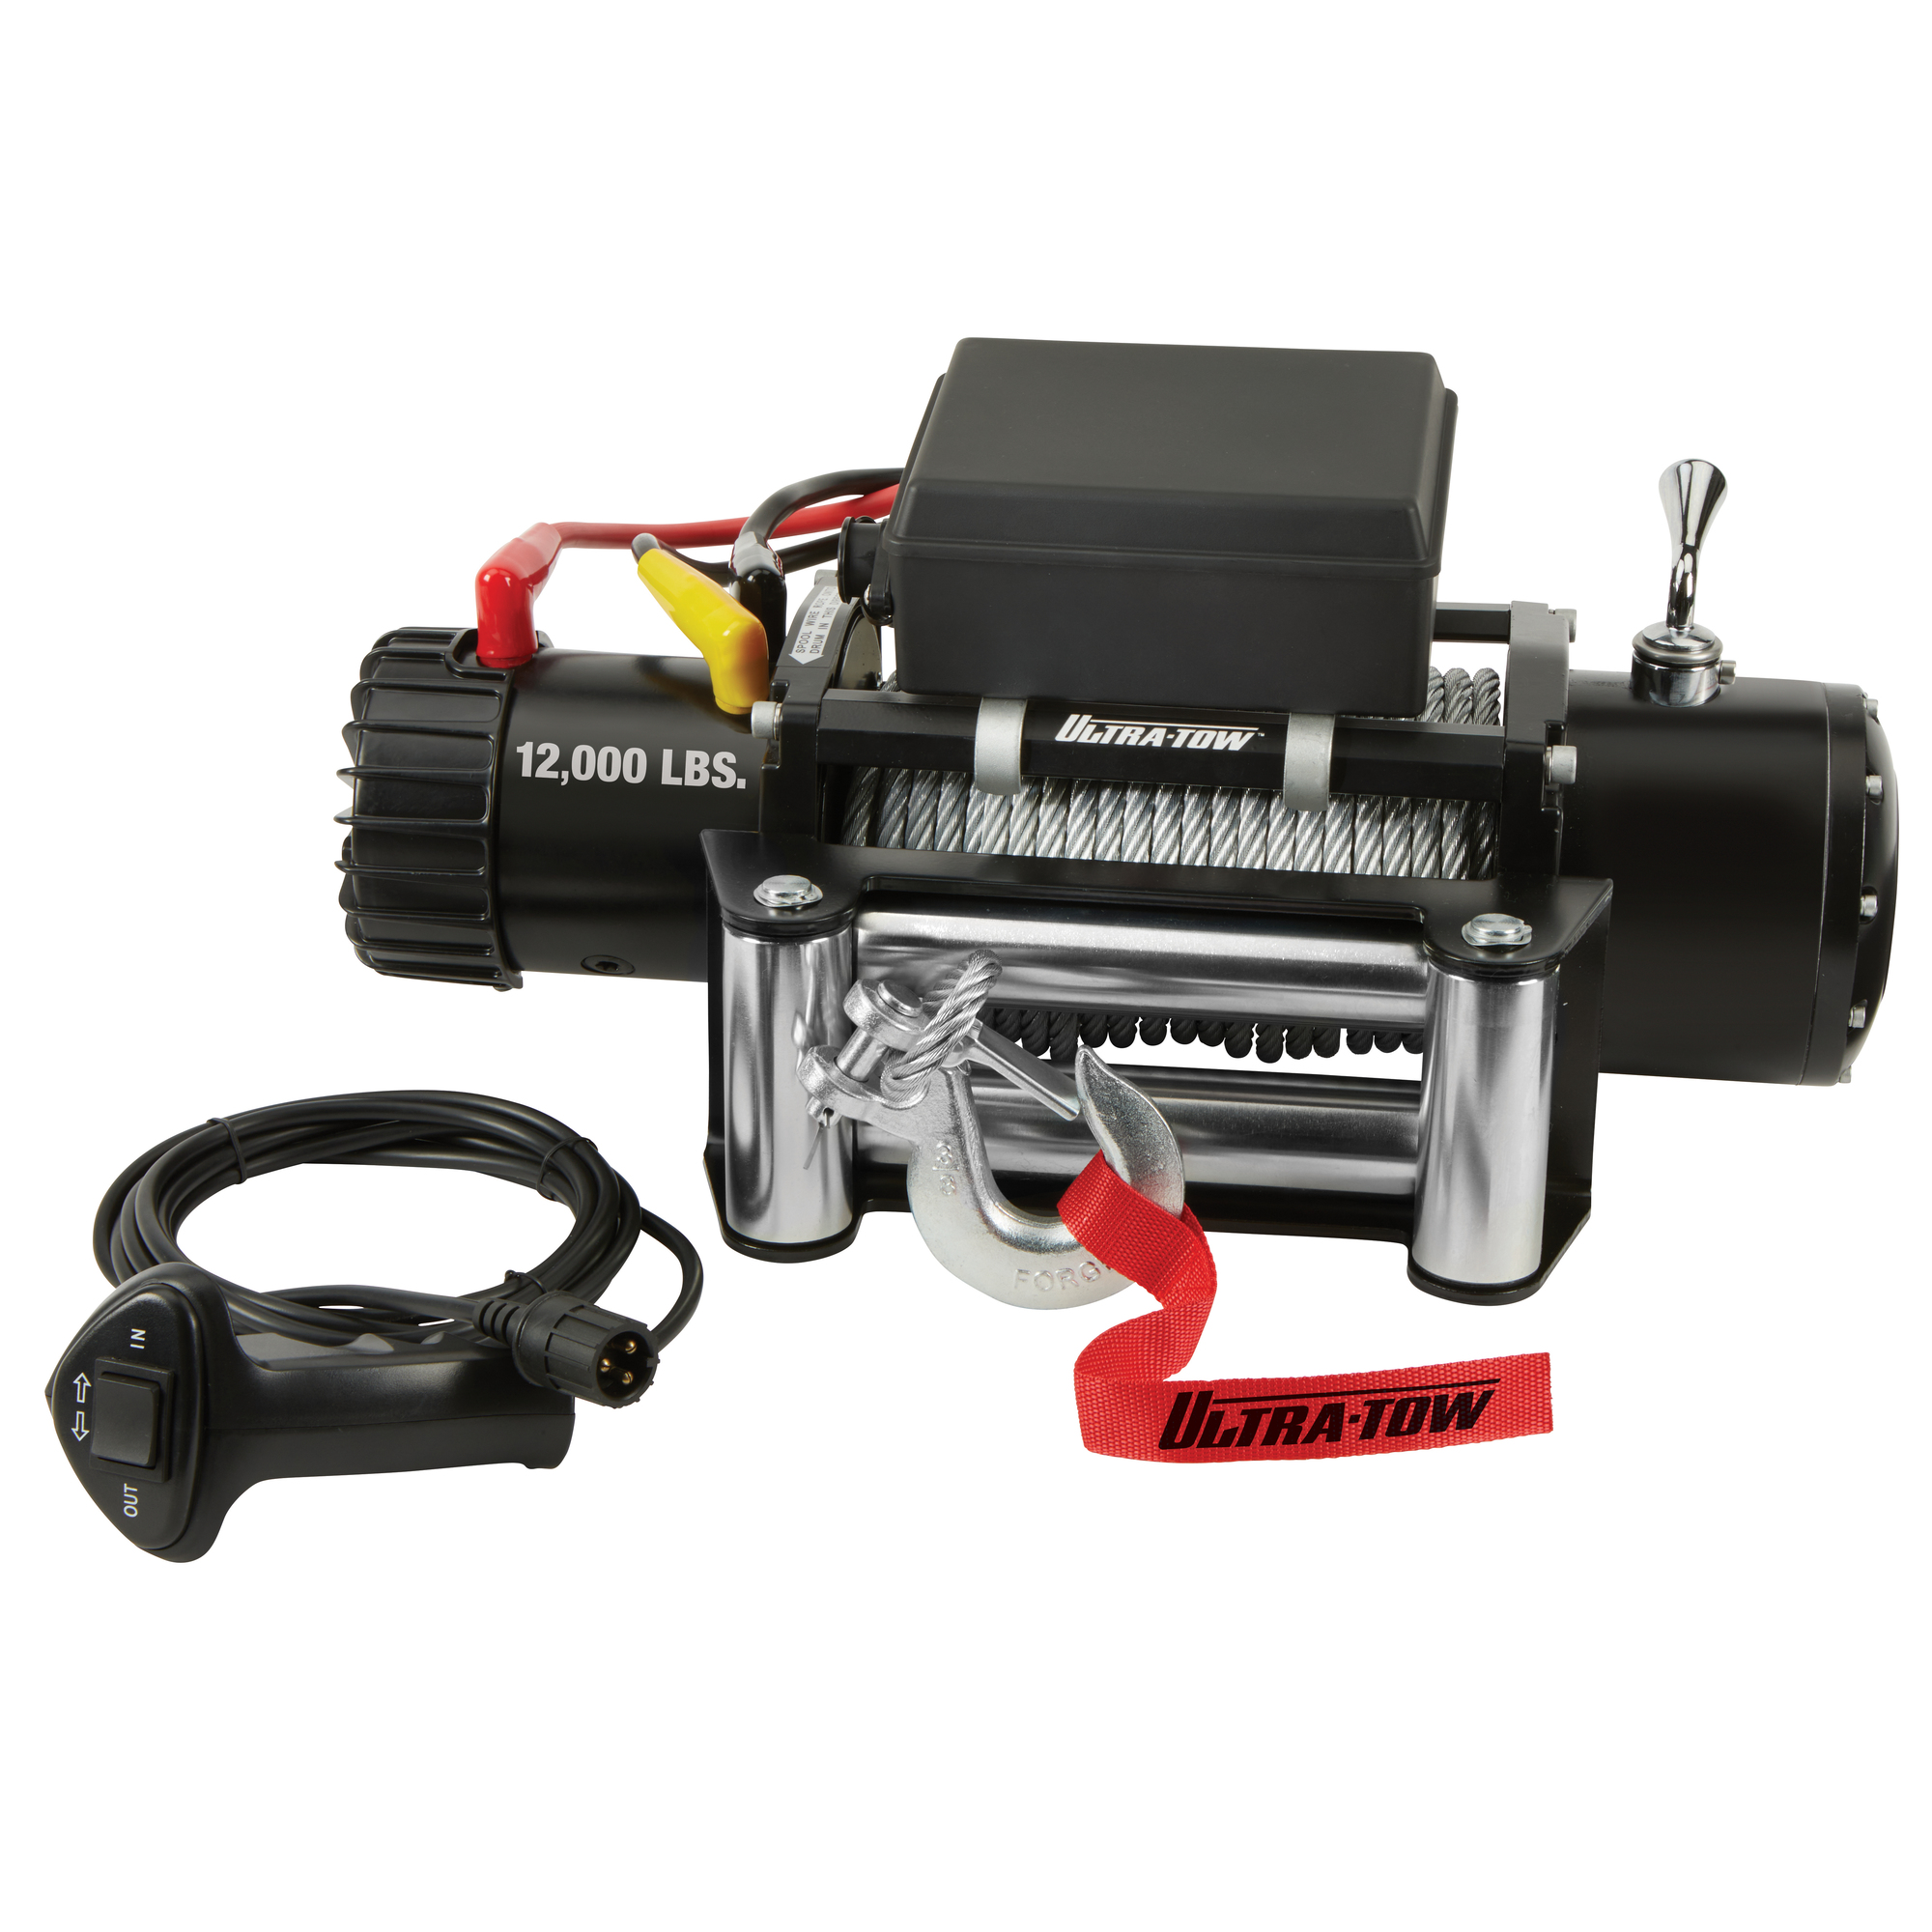 Ultra-Tow 12 Volt DC-Powered Off-Road Vehicle Winch, 12,000-Lb. Capacity, Galvanized Wire Rope, Model LD-D12000